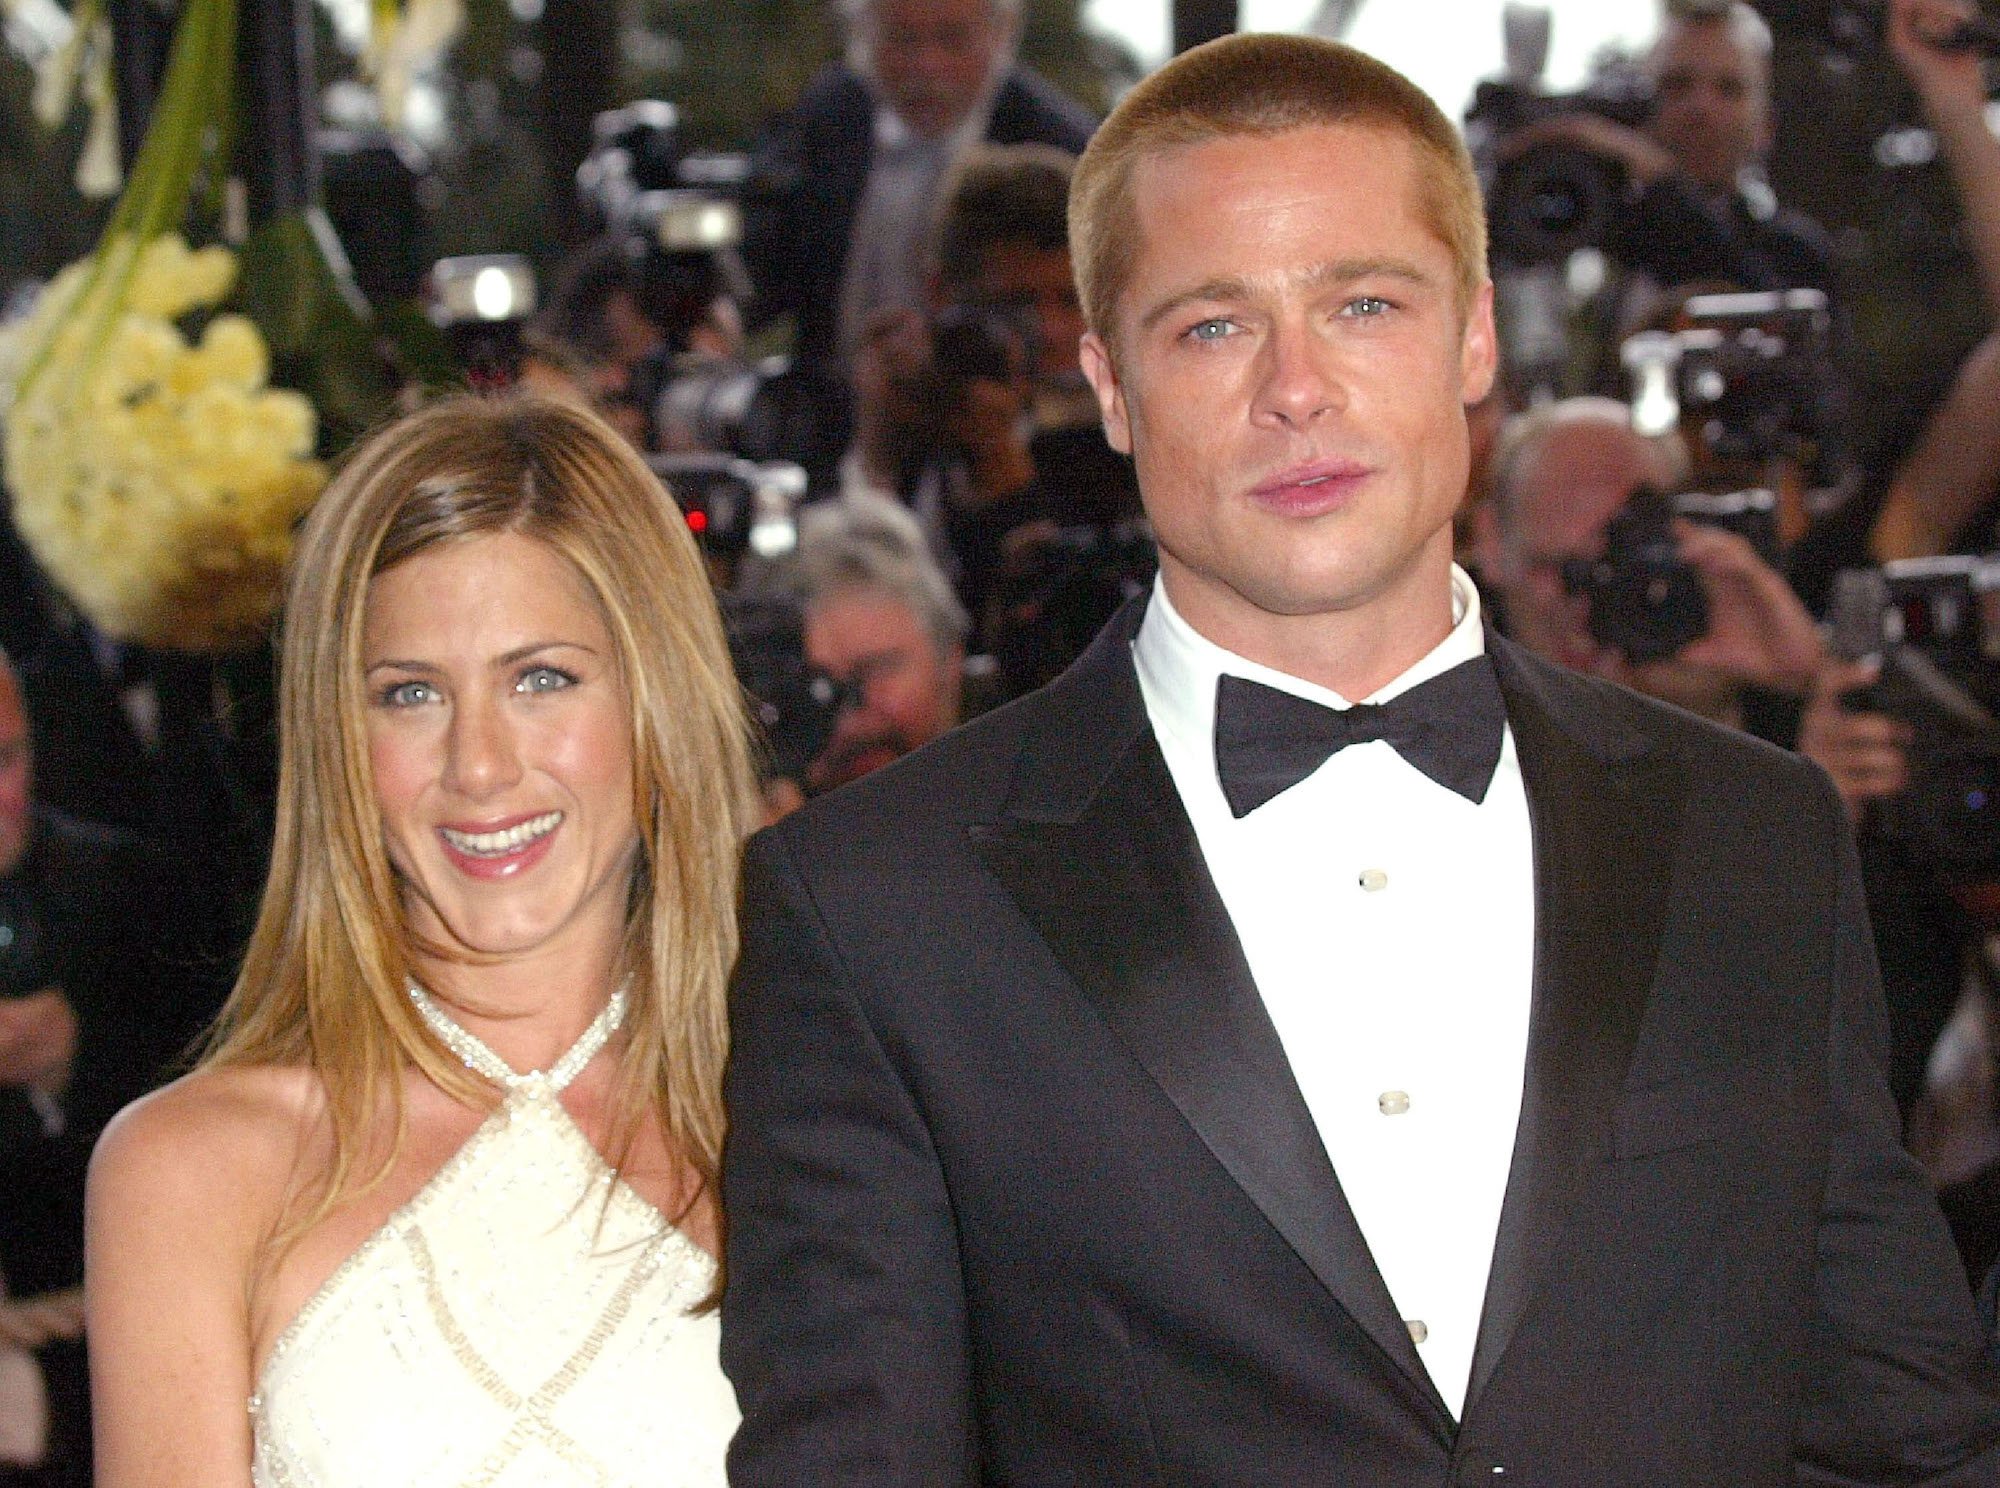 Jennifer Aniston and Brad Pitt the premiere of "Troy" at the 2004 Cannes Film Festival